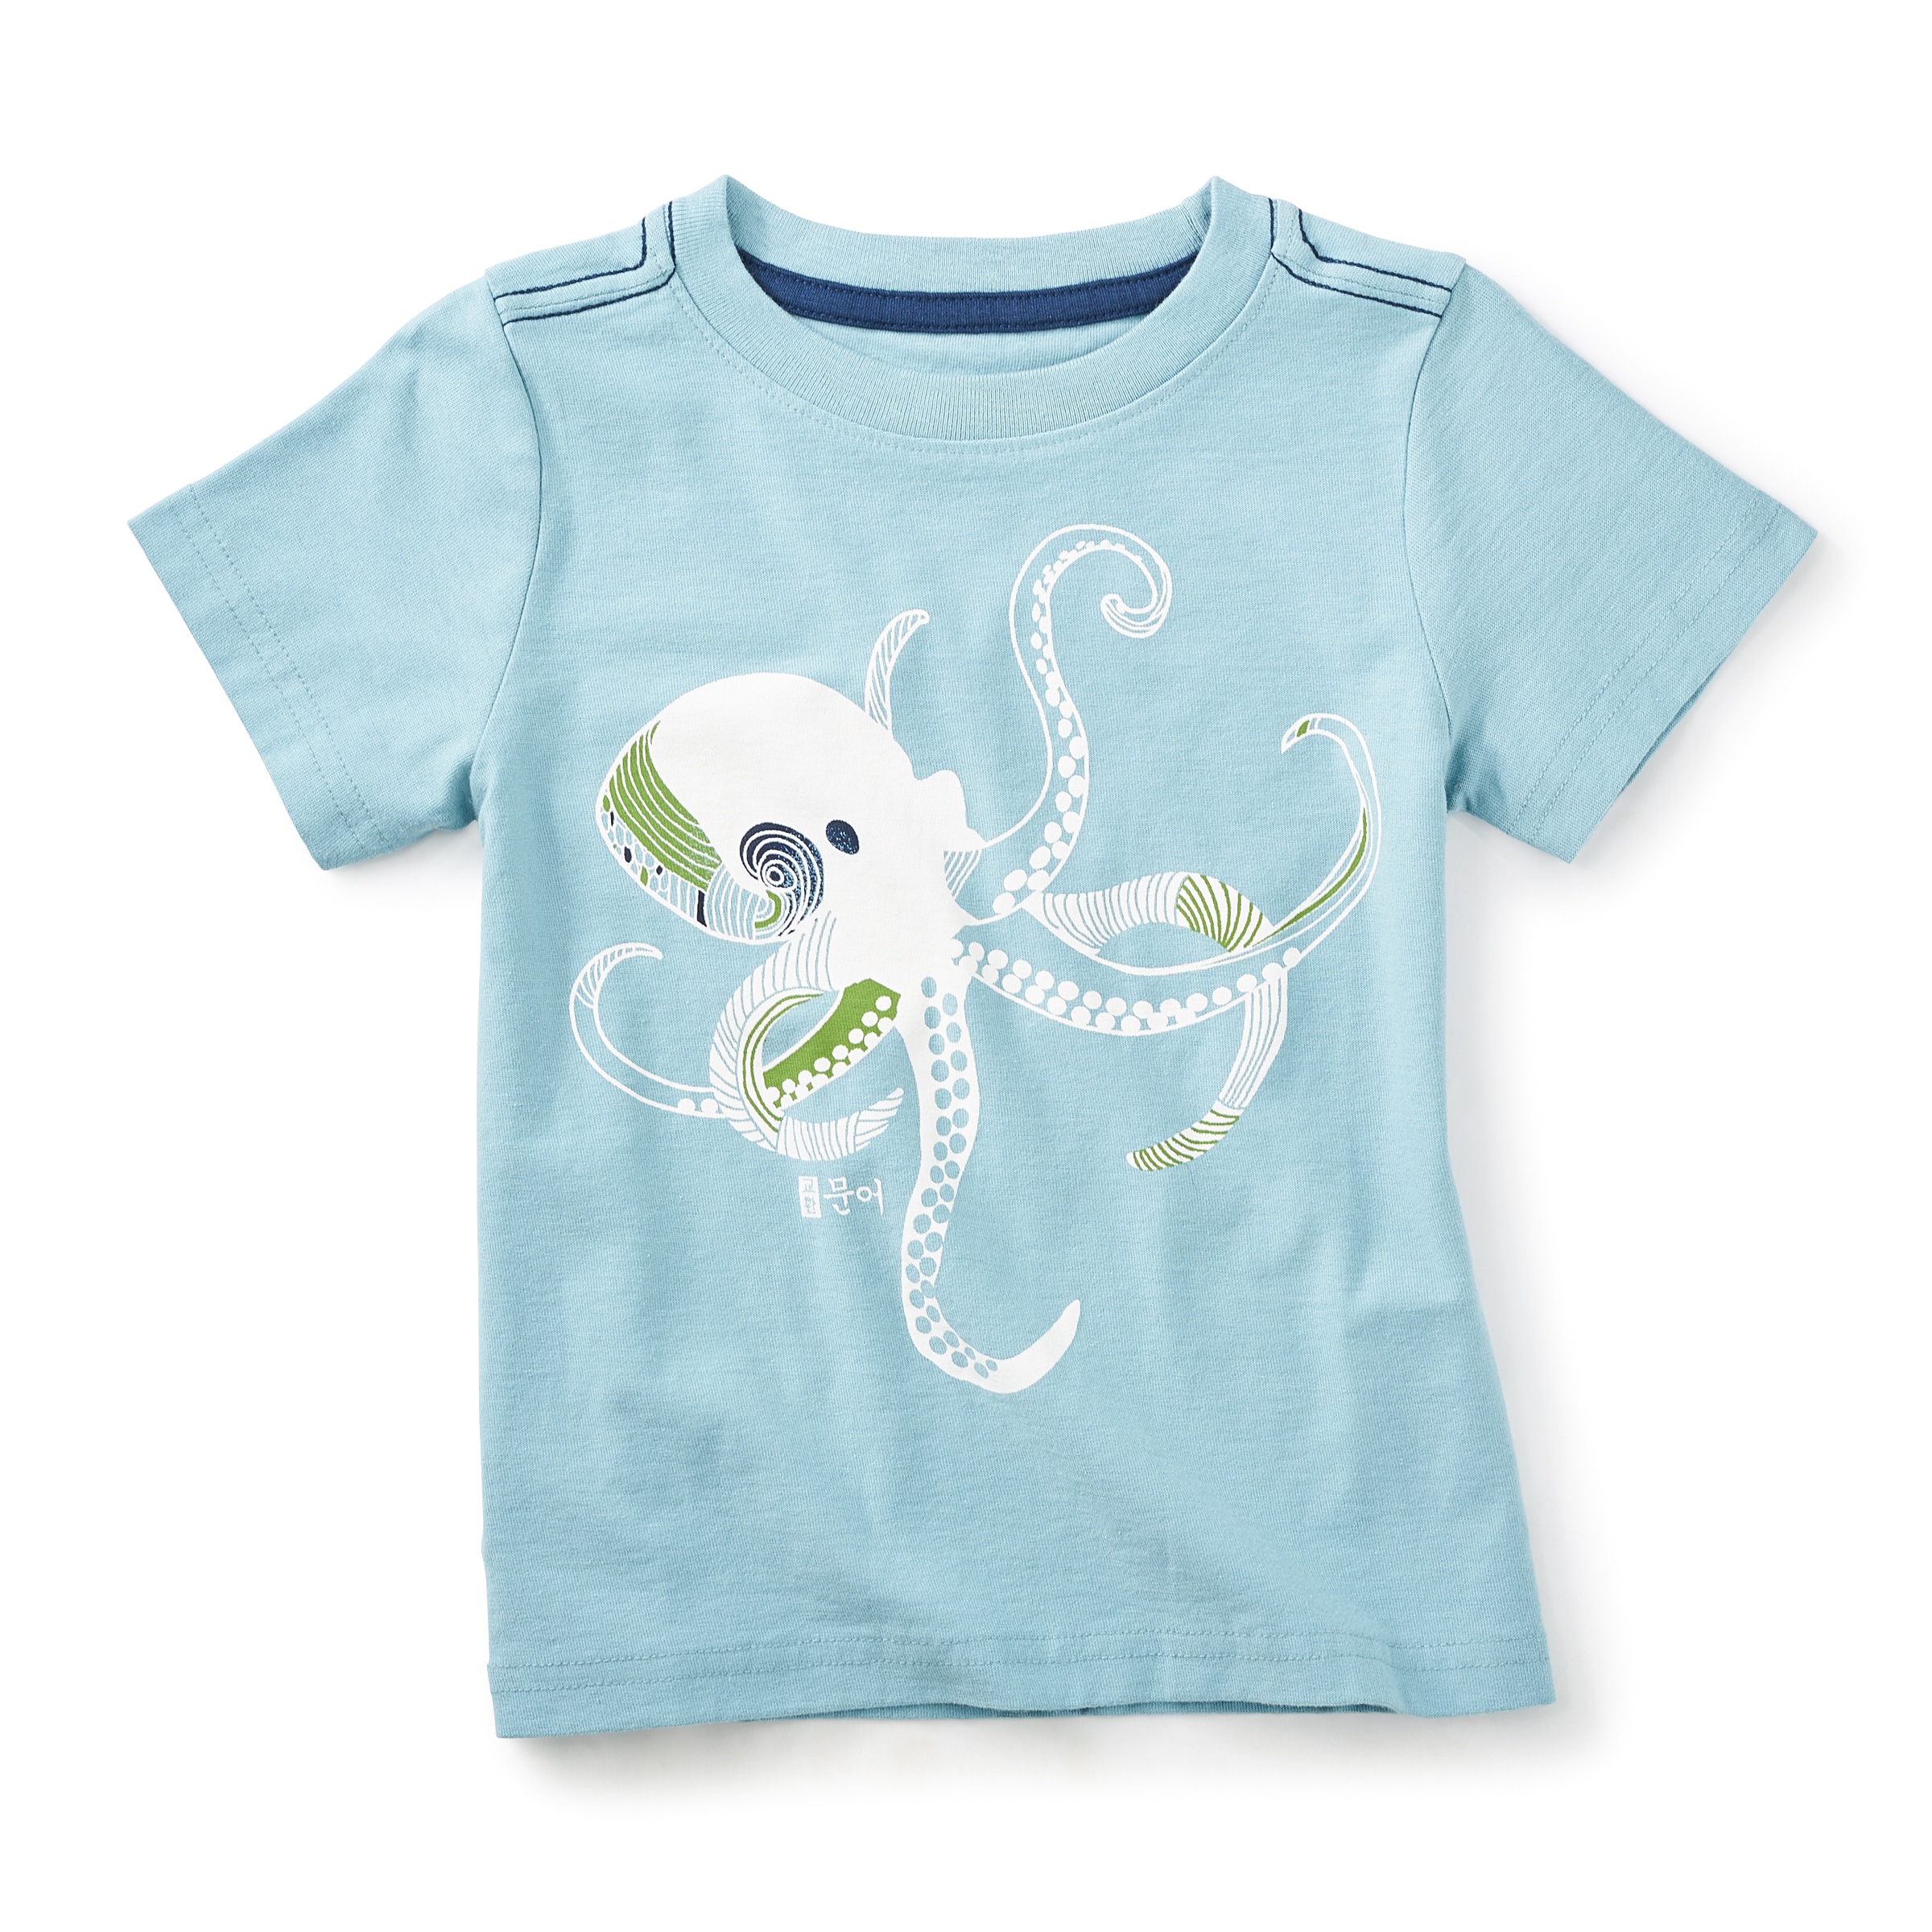 East Sea Squid Graphic Tee | Tea Collection